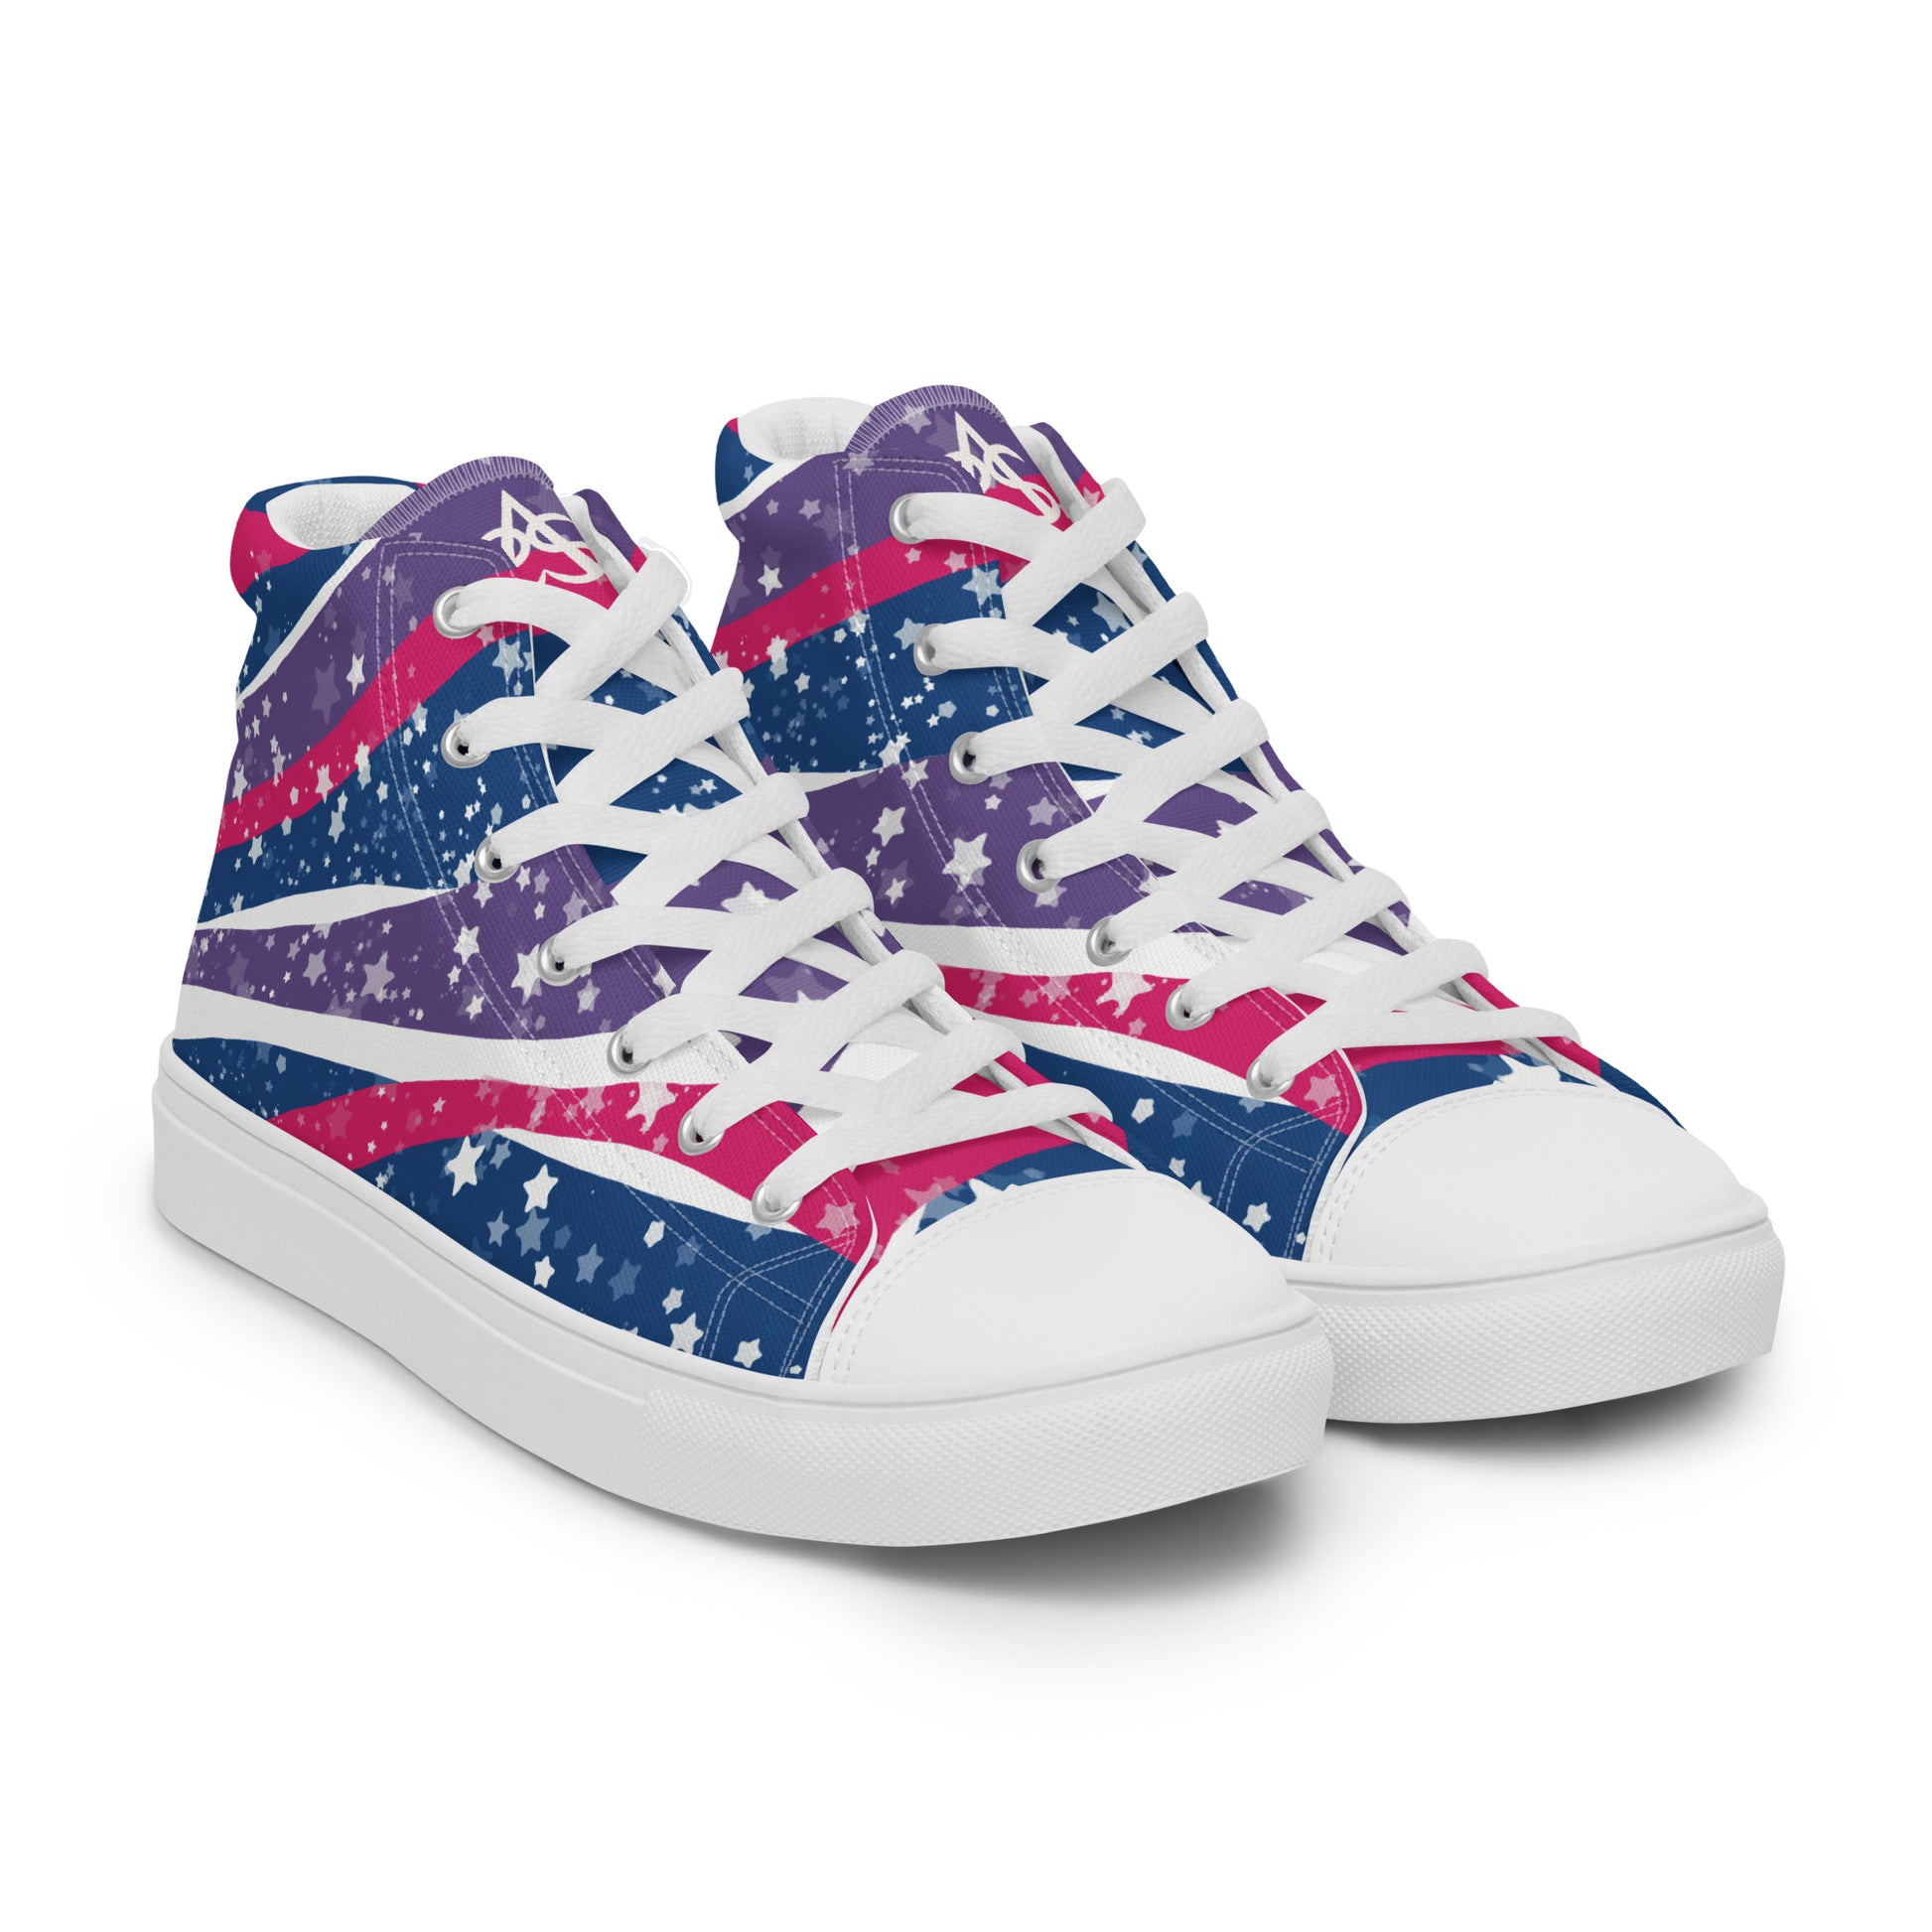 Right front view: a pair of high top shoes with pink, purple, and blue ribbons that get larger from heel to laces, white stars, and the Aras Sivad logo on the tongue.